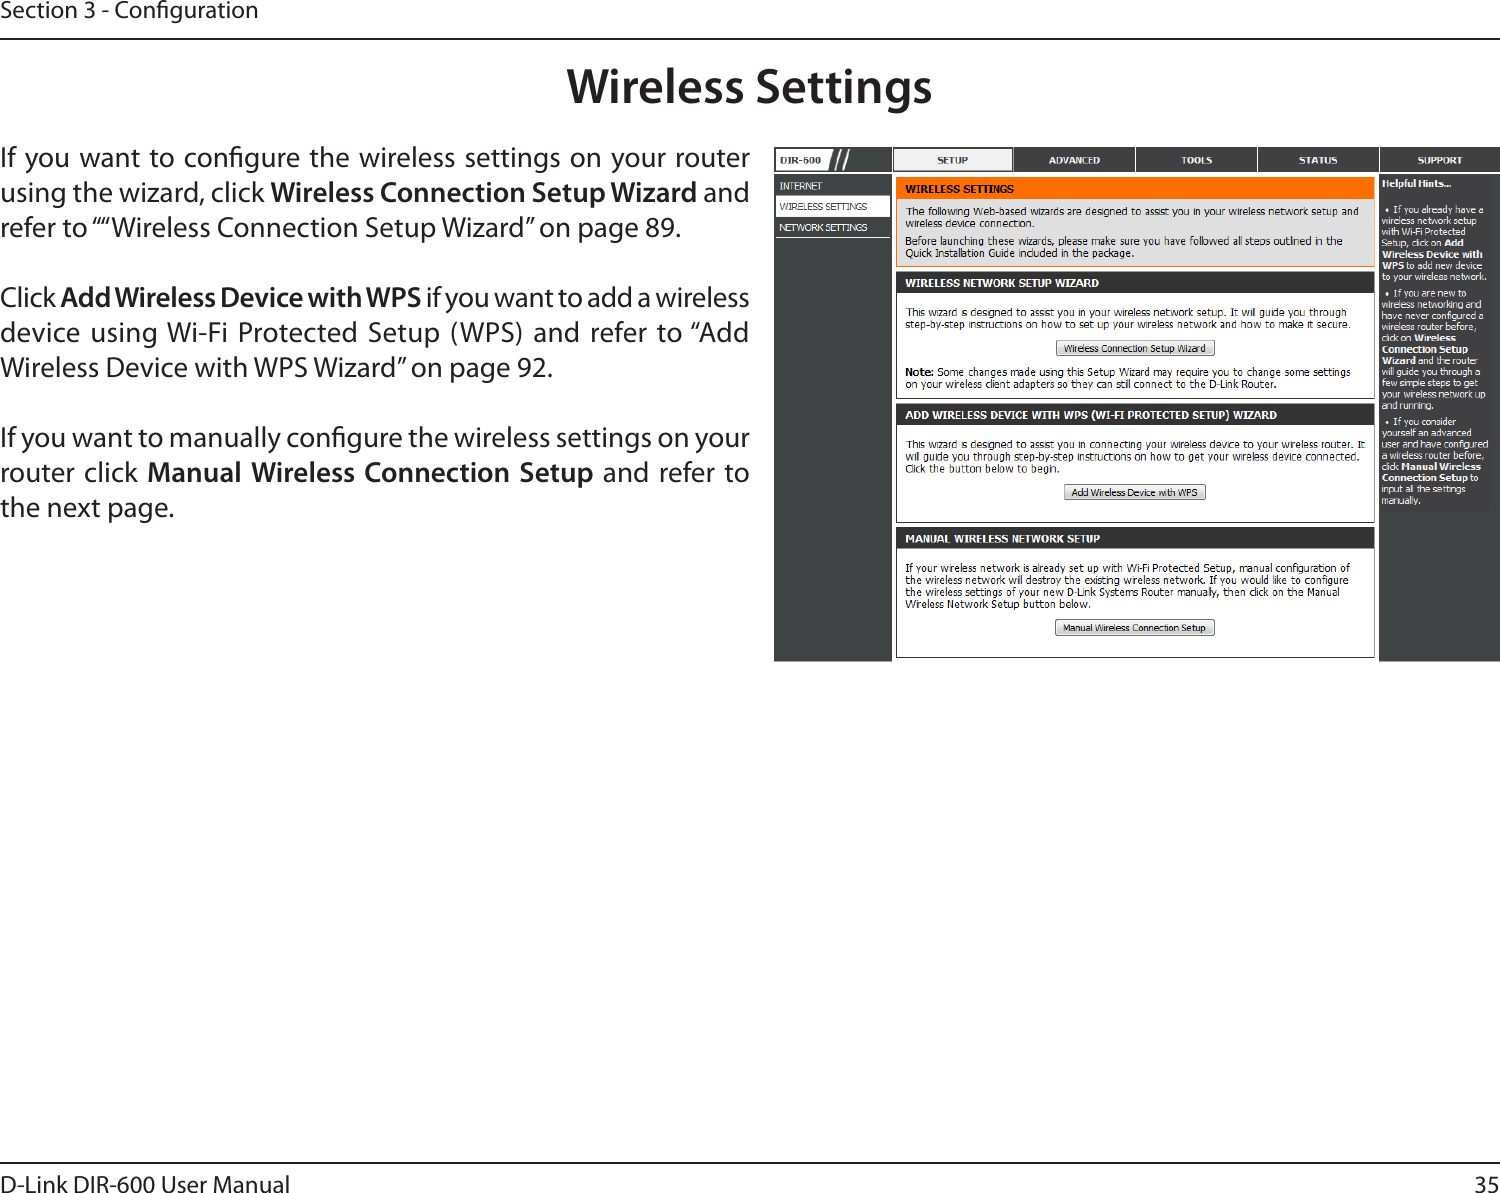 35D-Link DIR-600 User ManualSection 3 - CongurationWireless SettingsIf you want to congure the wireless settings on your router using the wizard, click Wireless Connection Setup Wizard and refer to ““Wireless Connection Setup Wizard” on page 89.Click Add Wireless Device with WPS if you want to add a wireless device using Wi-Fi  Protected Setup (WPS) and  refer to “Add Wireless Device with WPS Wizard” on page 92.If you want to manually congure the wireless settings on your router click  Manual Wireless Connection Setup  and refer to the next page.